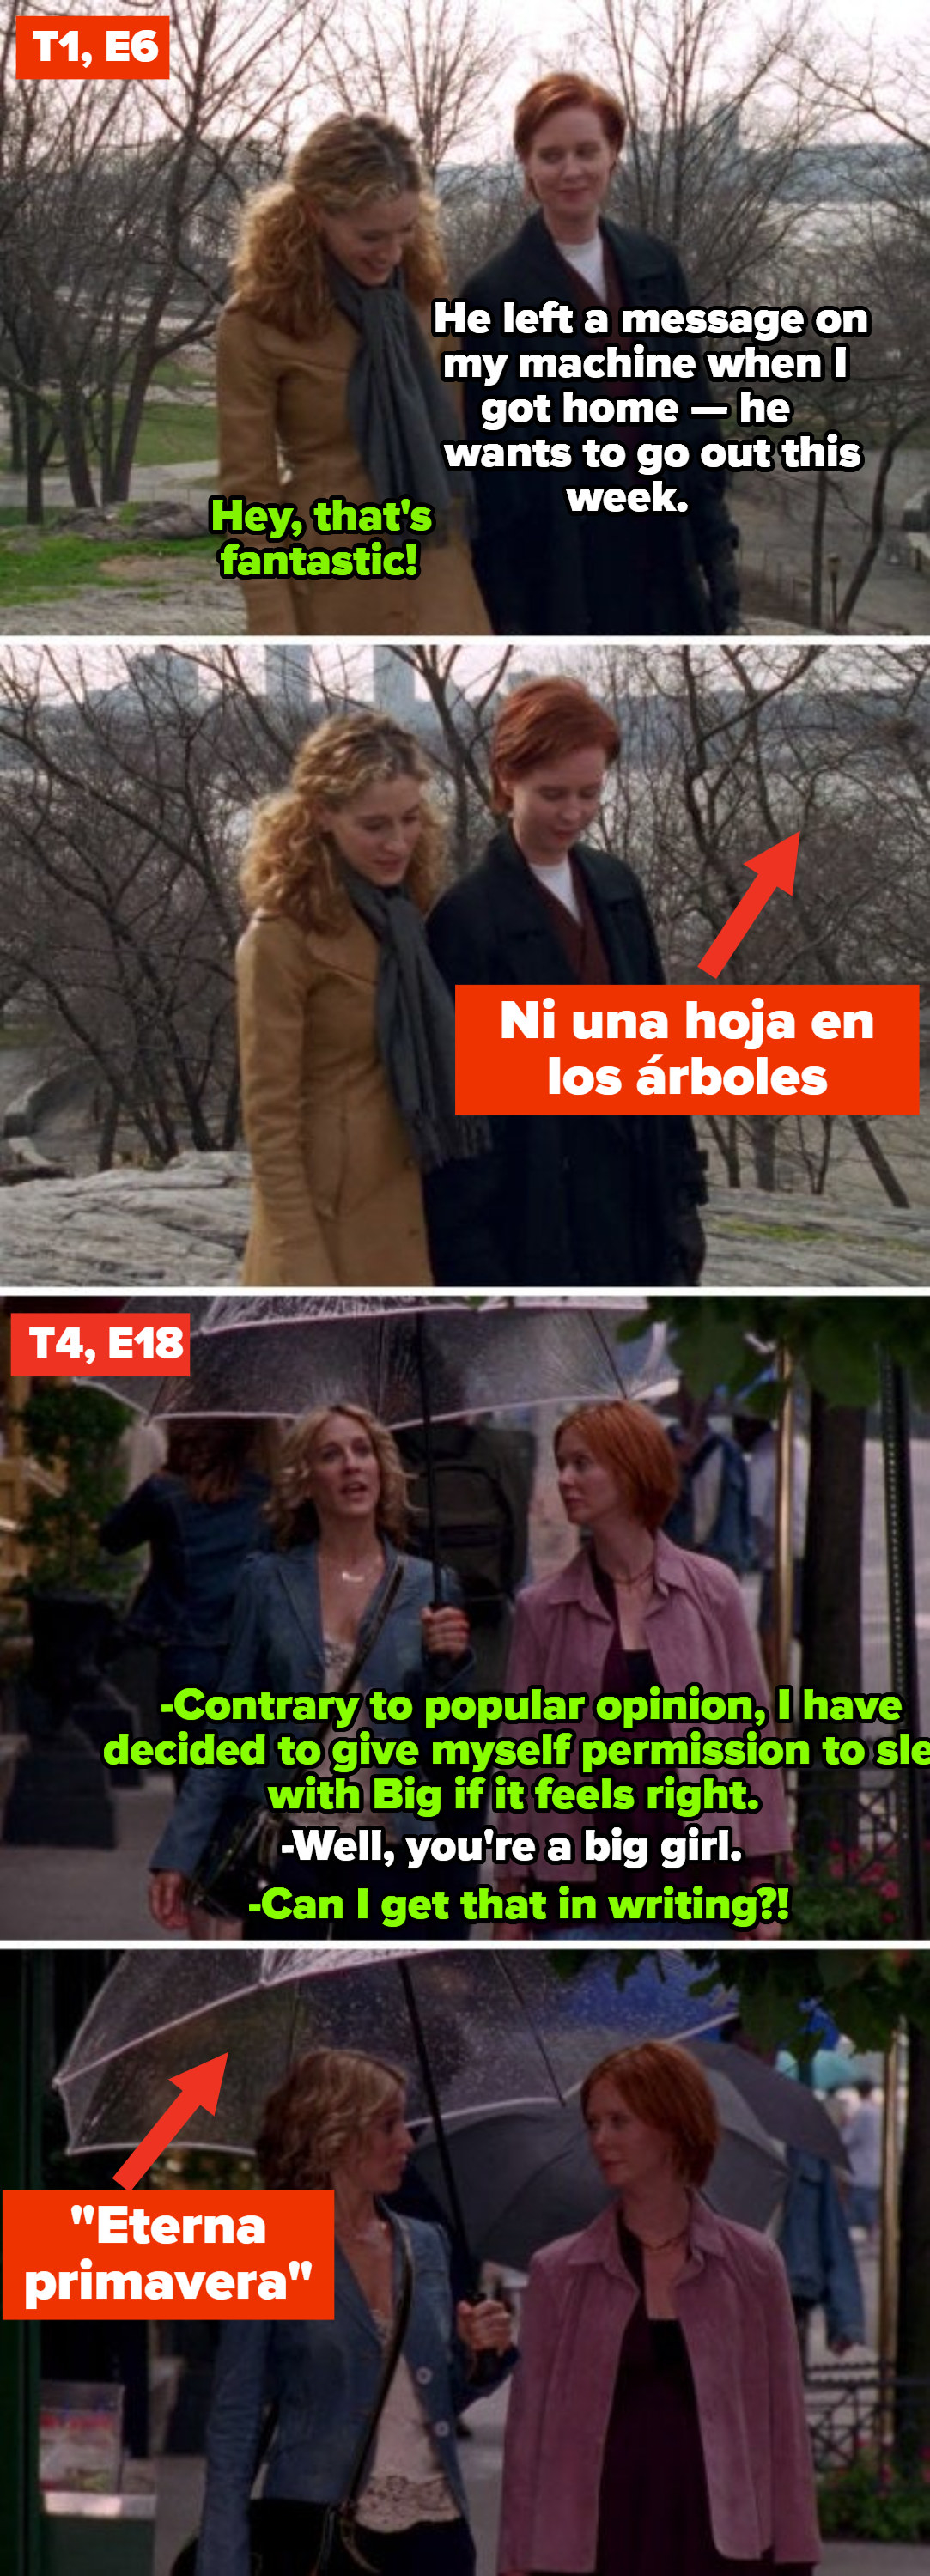 Carrie and Miranda walking in Riverside Park in S1, E6, aka winter; Carrie and Miranda walking around the city in S4, E18, aka &quot;Eternal spring&quot;